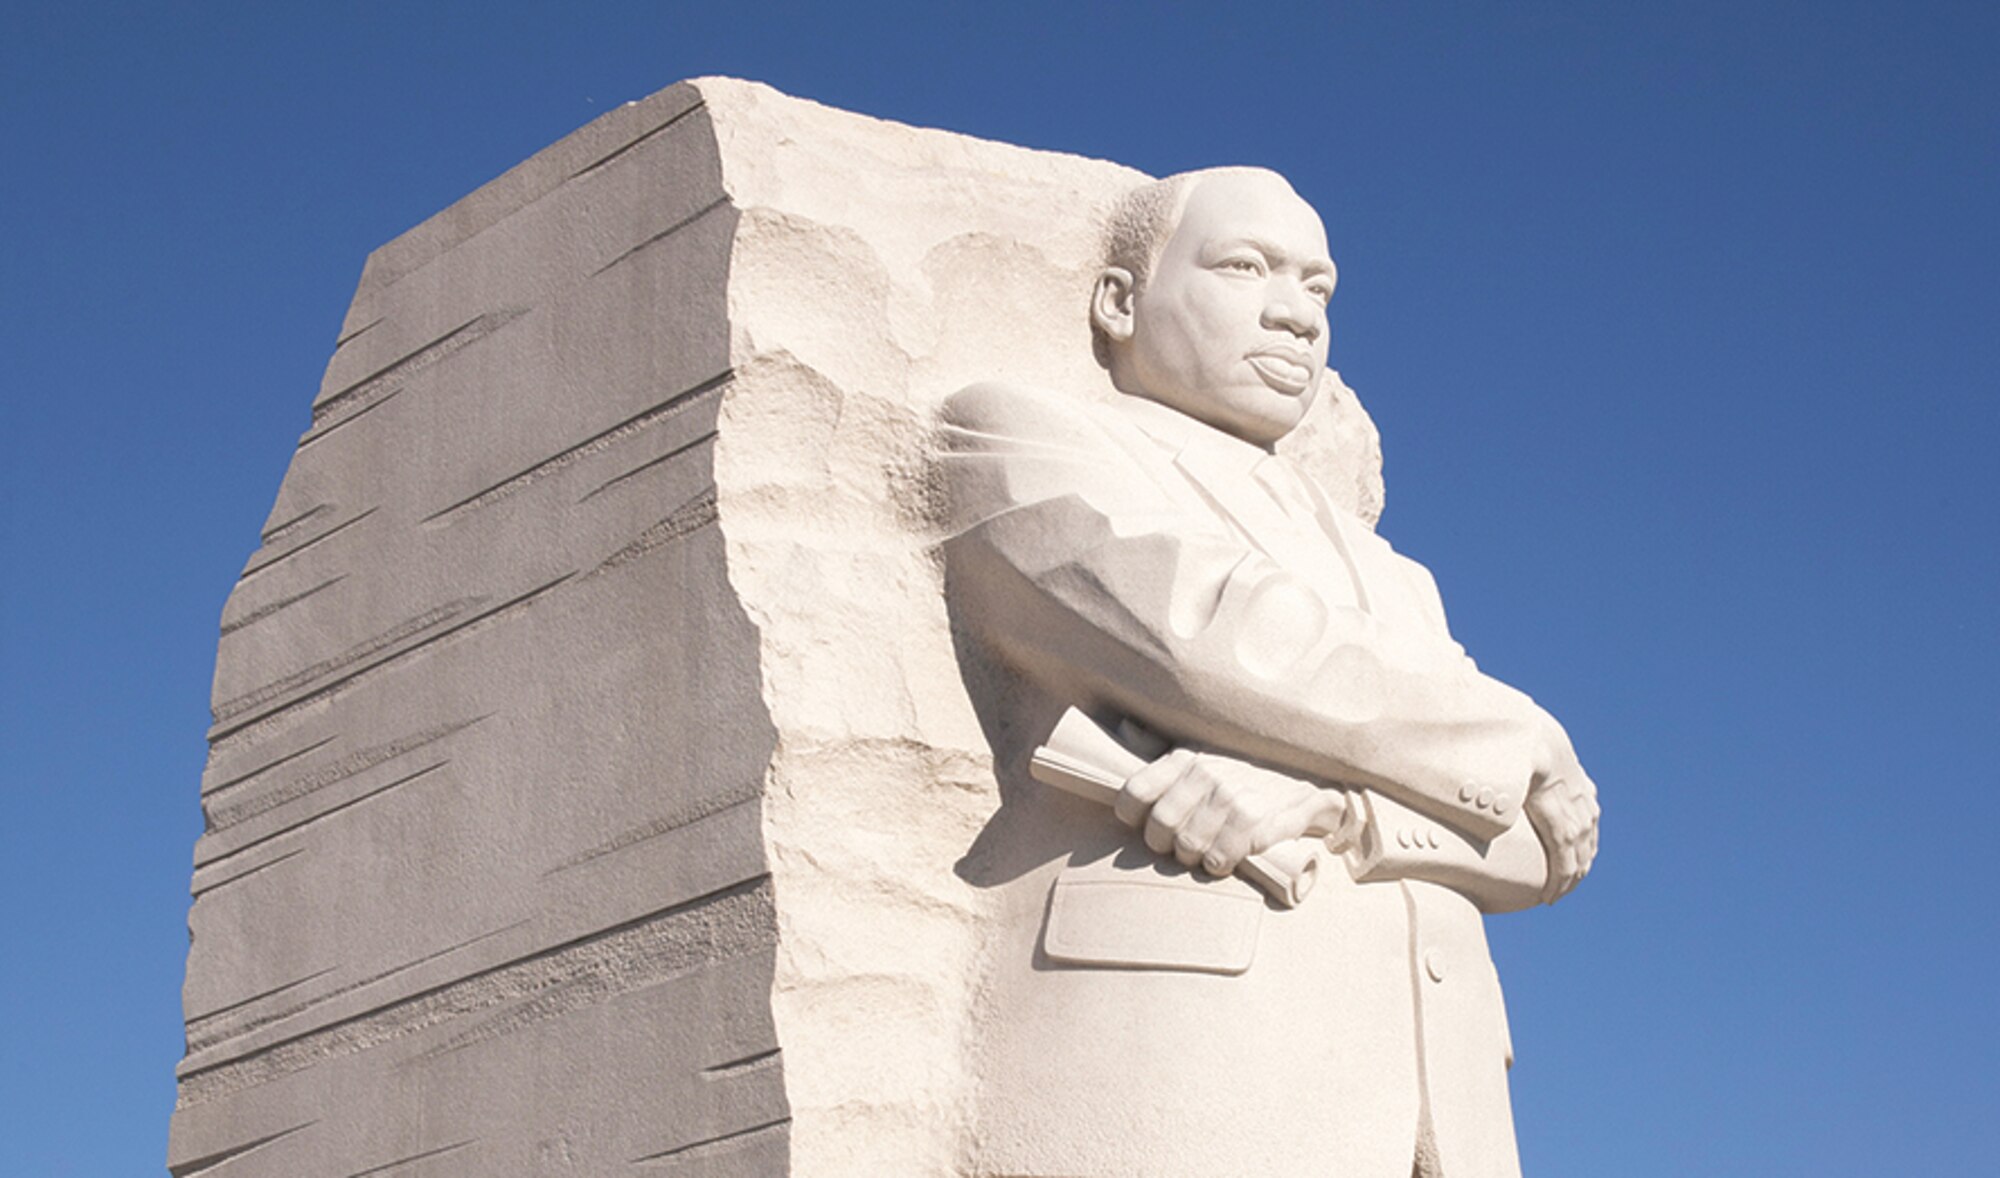 The 88th Air Base Wing at Wright-Patterson Air Force Base has announced holiday hours of operation in memory of the birthday of Dr. Martin Luther King Jr. on Monday, Jan. 20, 2020. (Contributed photo)